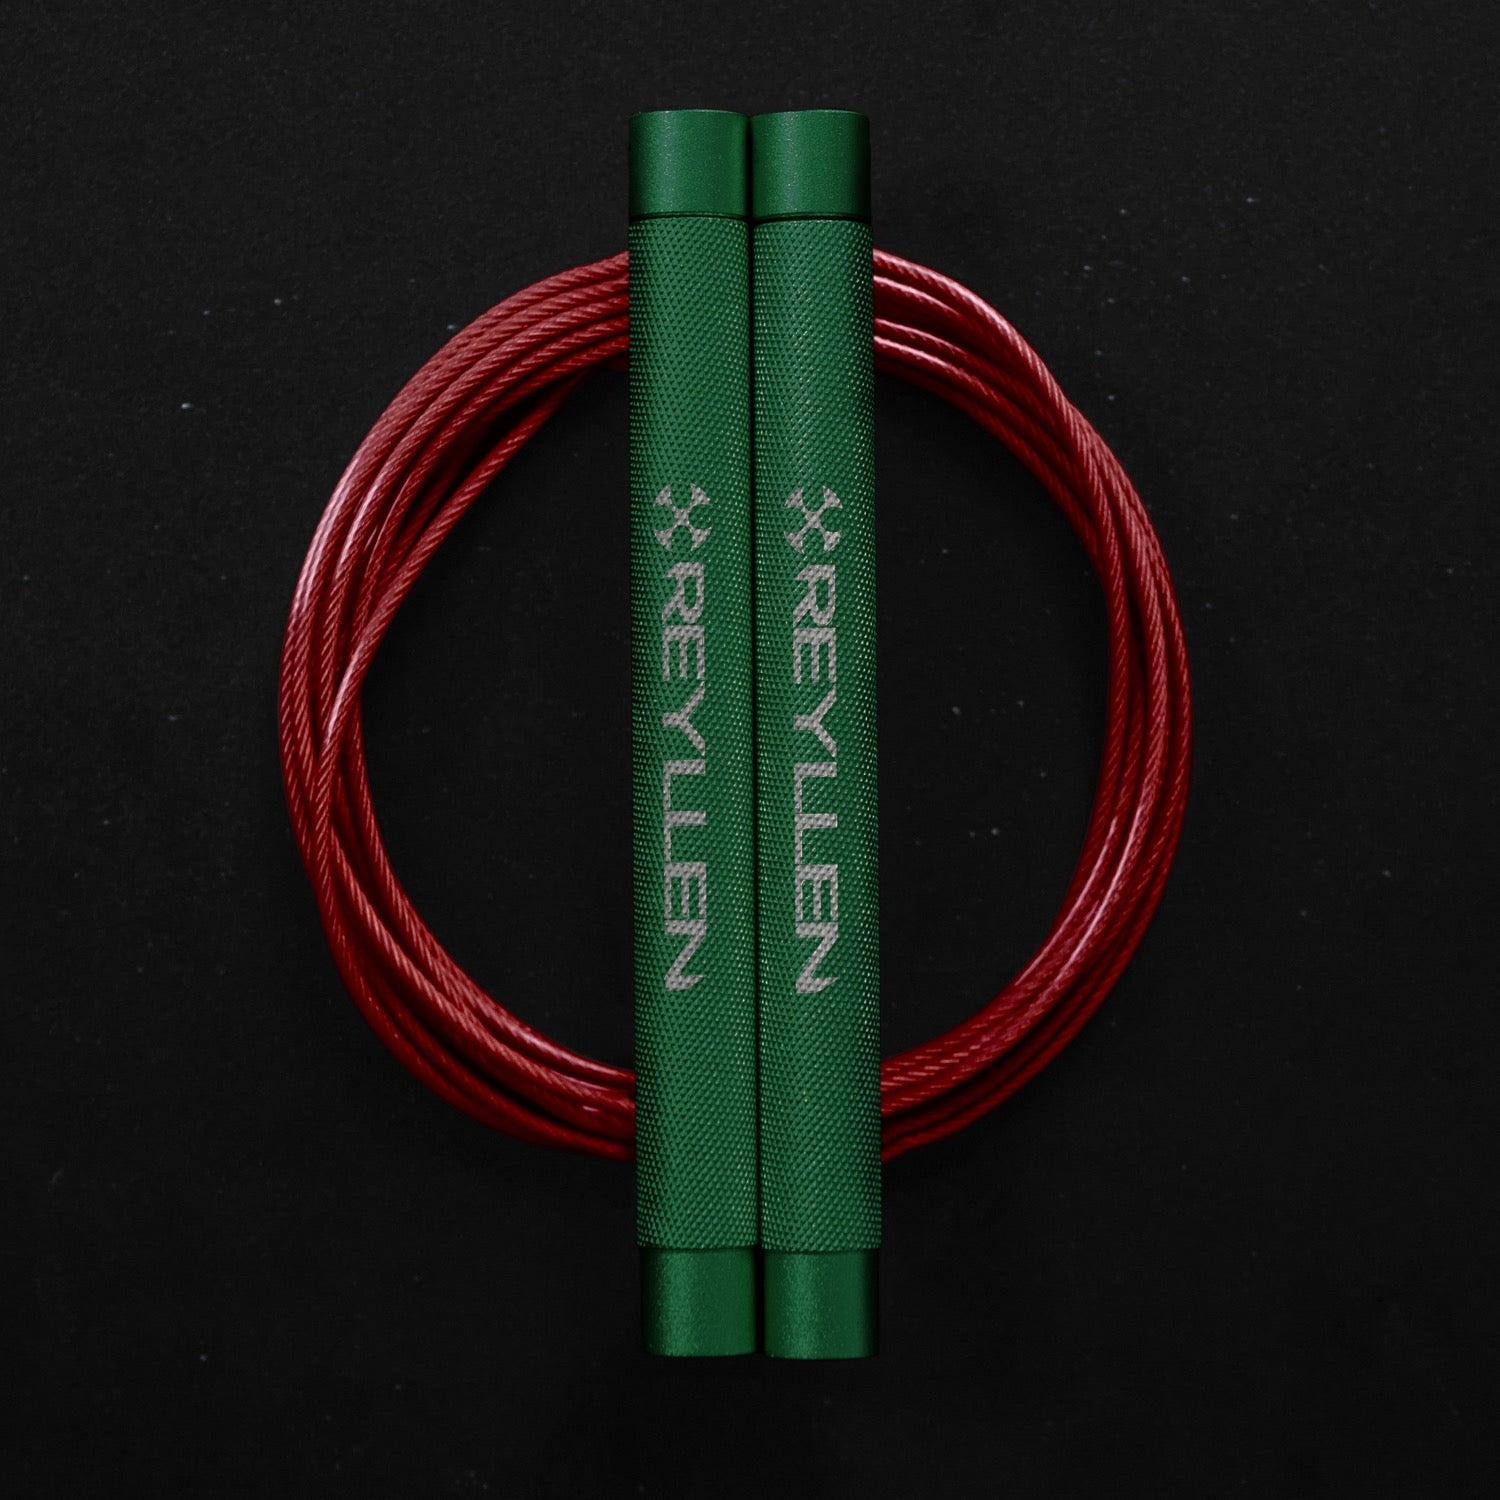 Reyllen Flare Mx Speed Skipping Jump Rope - Aluminium Handles - green with red pvc coated cable